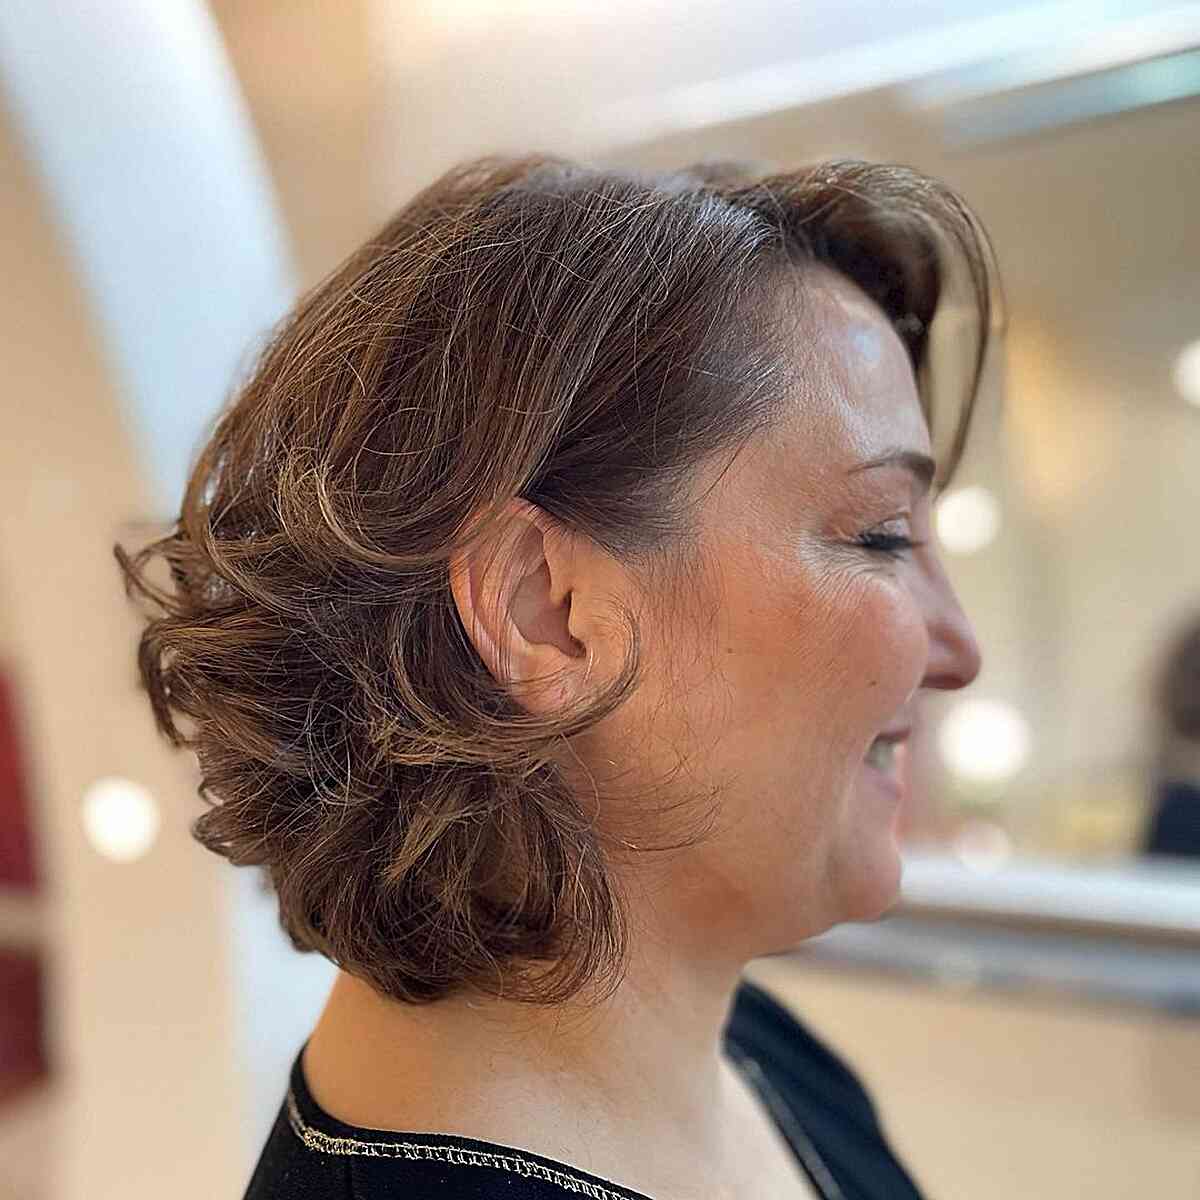 Super cute short cut with curled ends for old ladies with thin hair